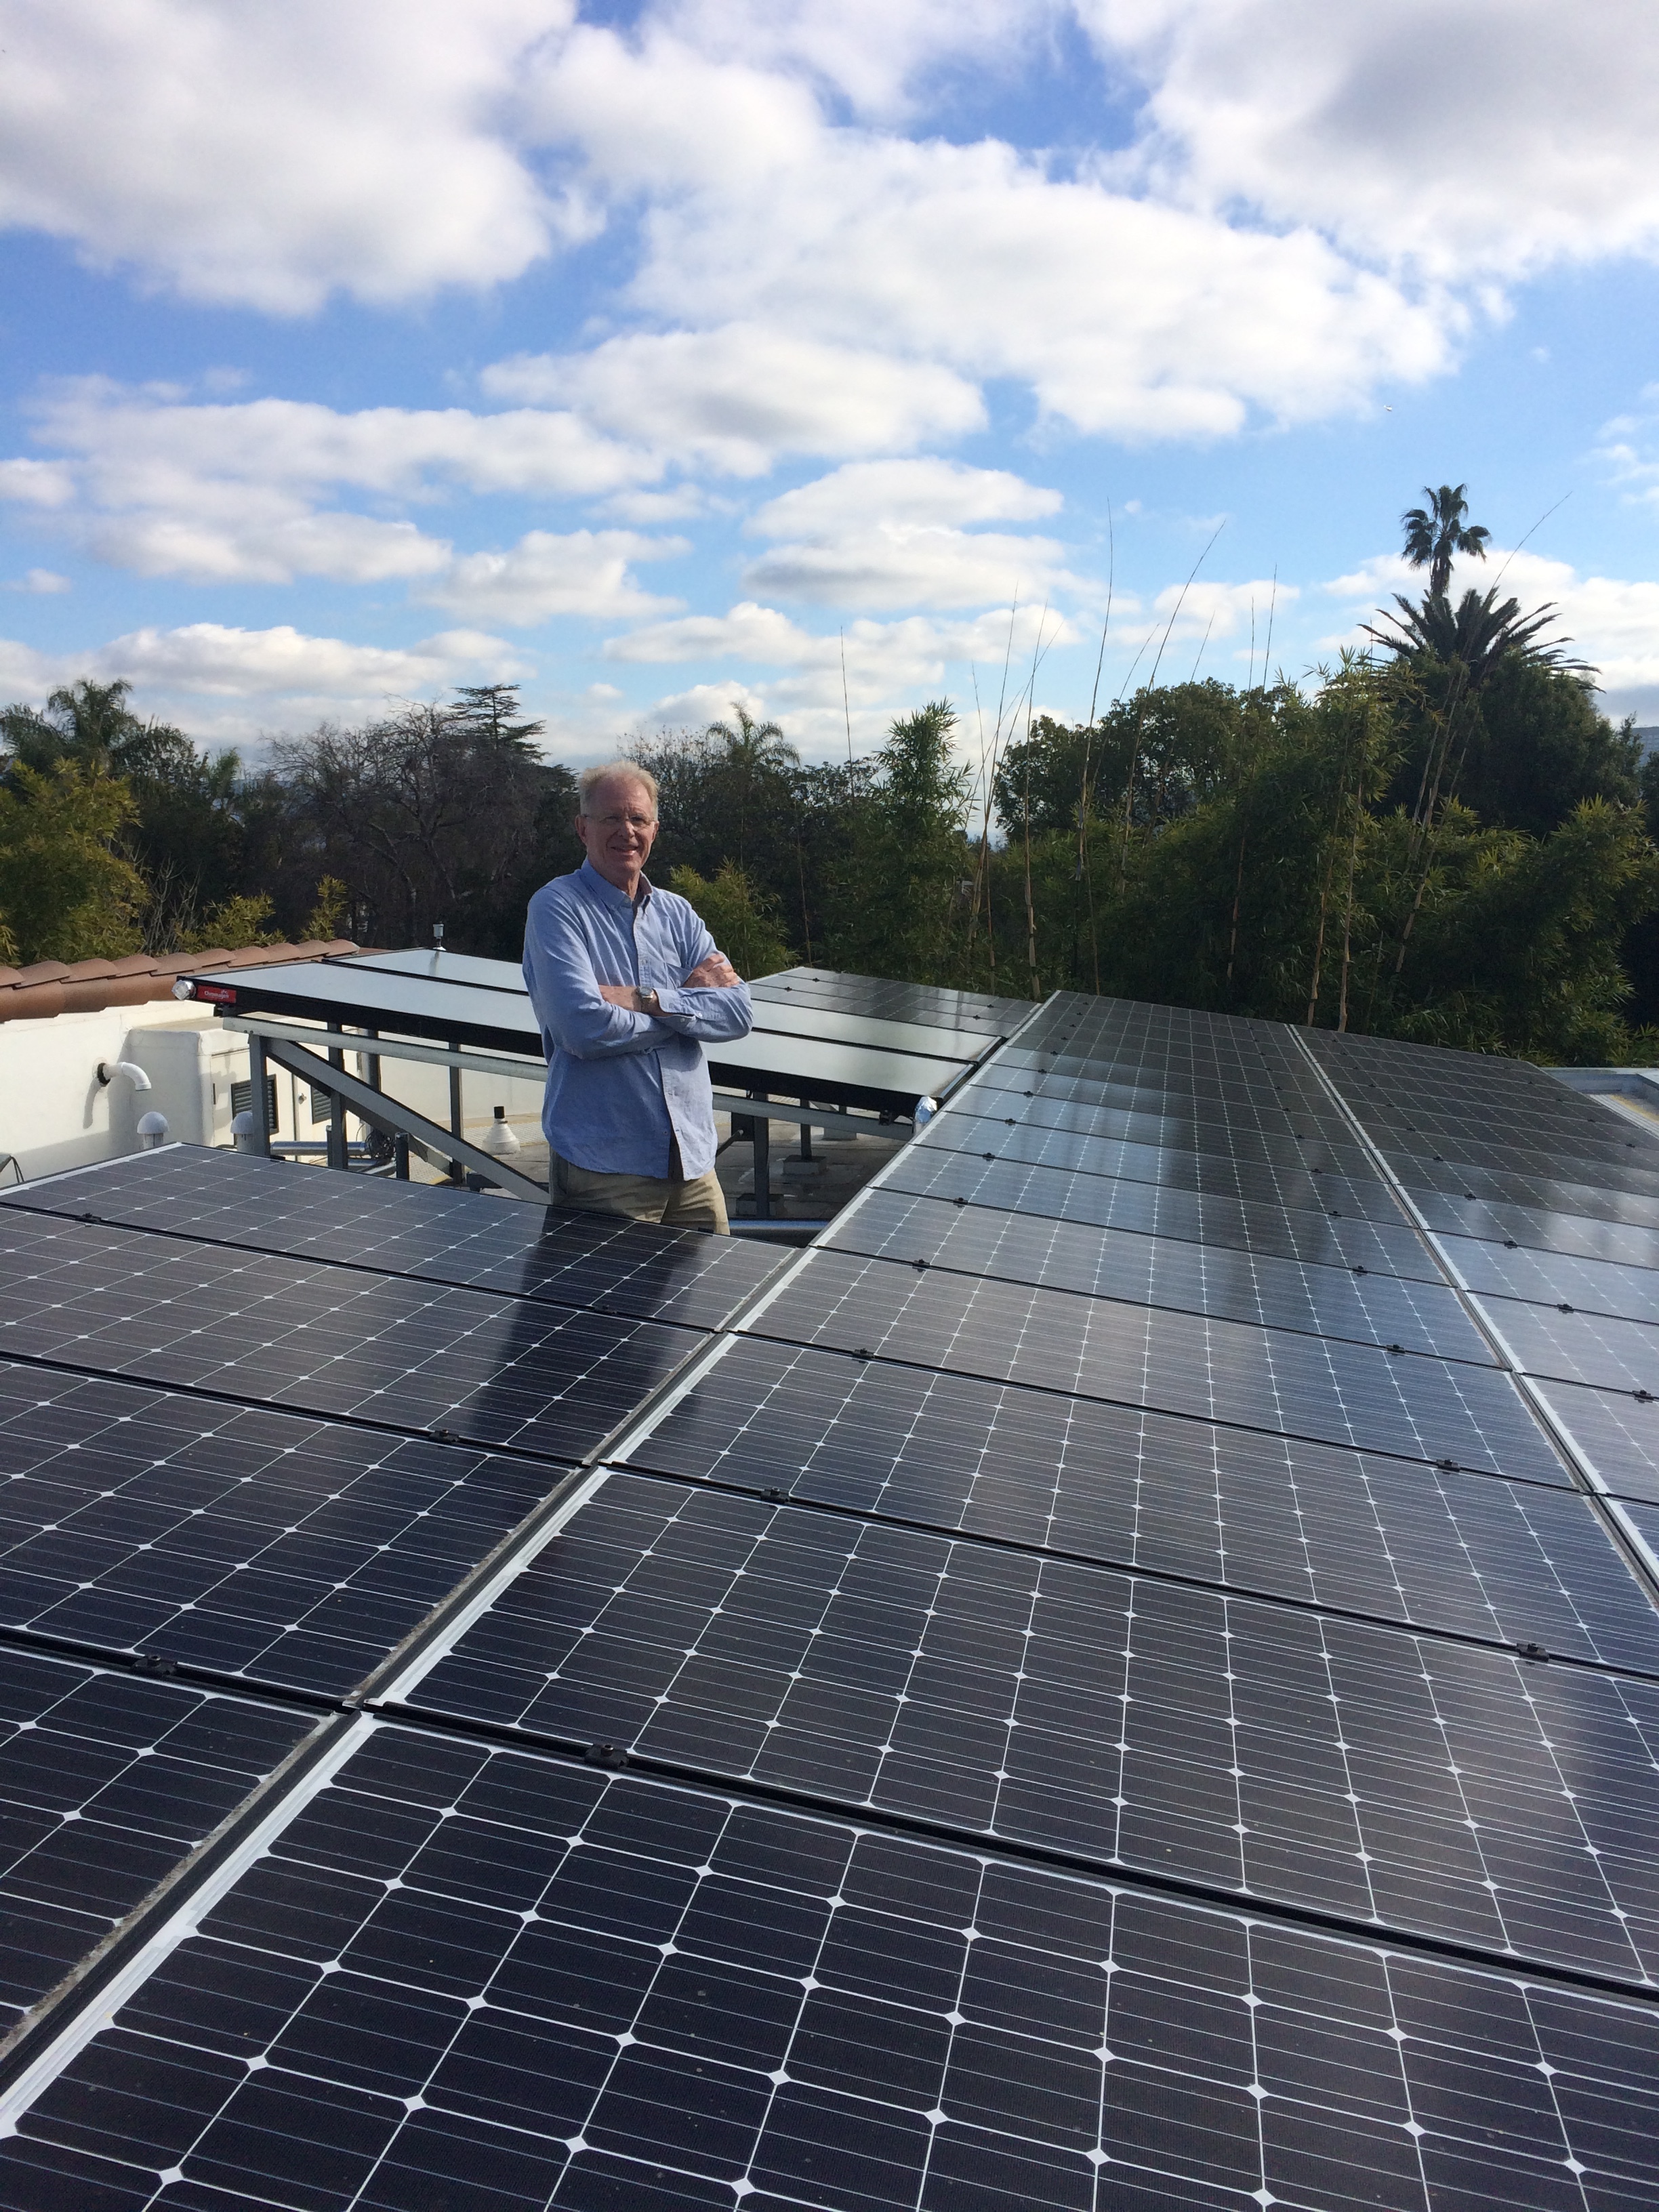   Ed with his solar panels  